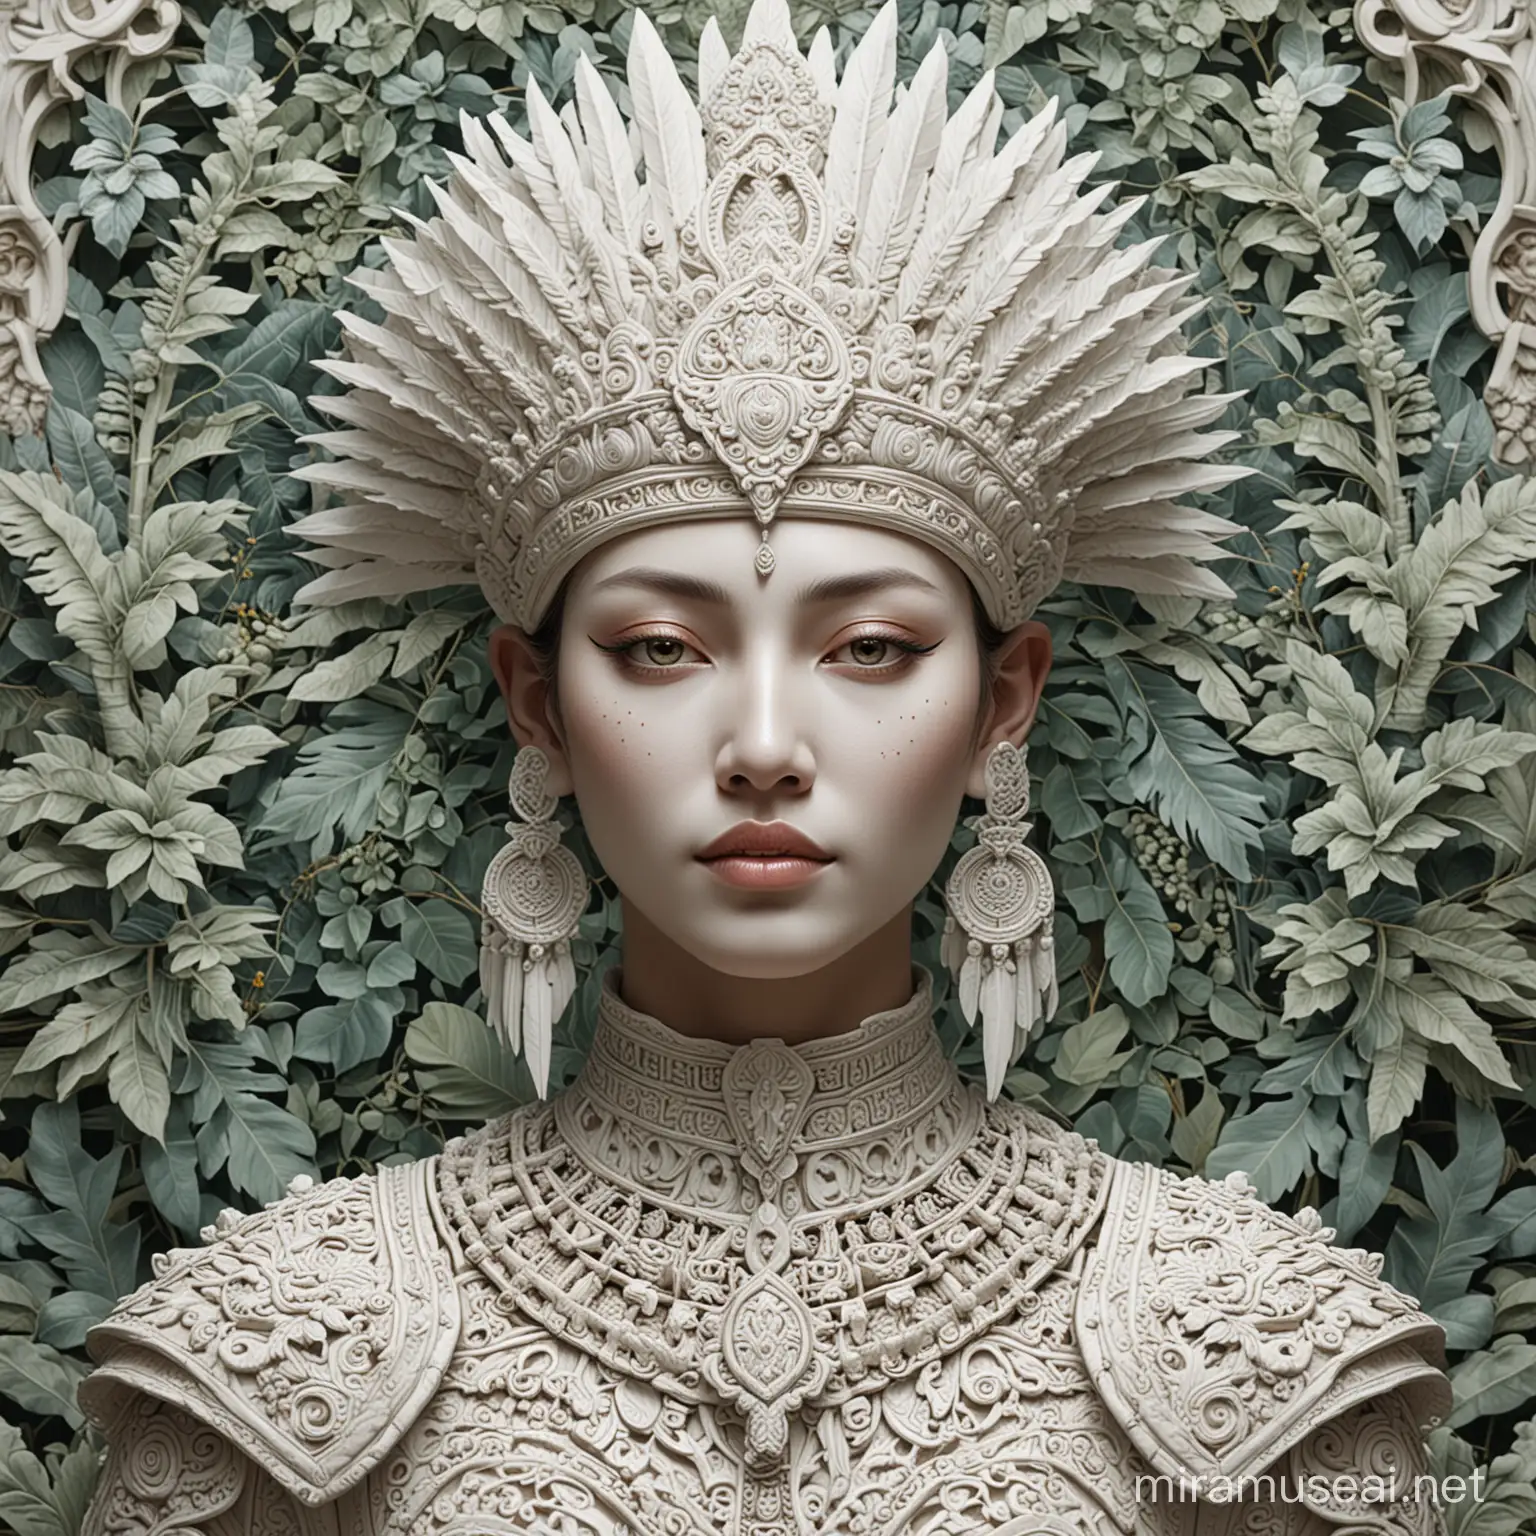 Regal Chaac Portrait in Porcelain Effect and Lush Jungle Setting